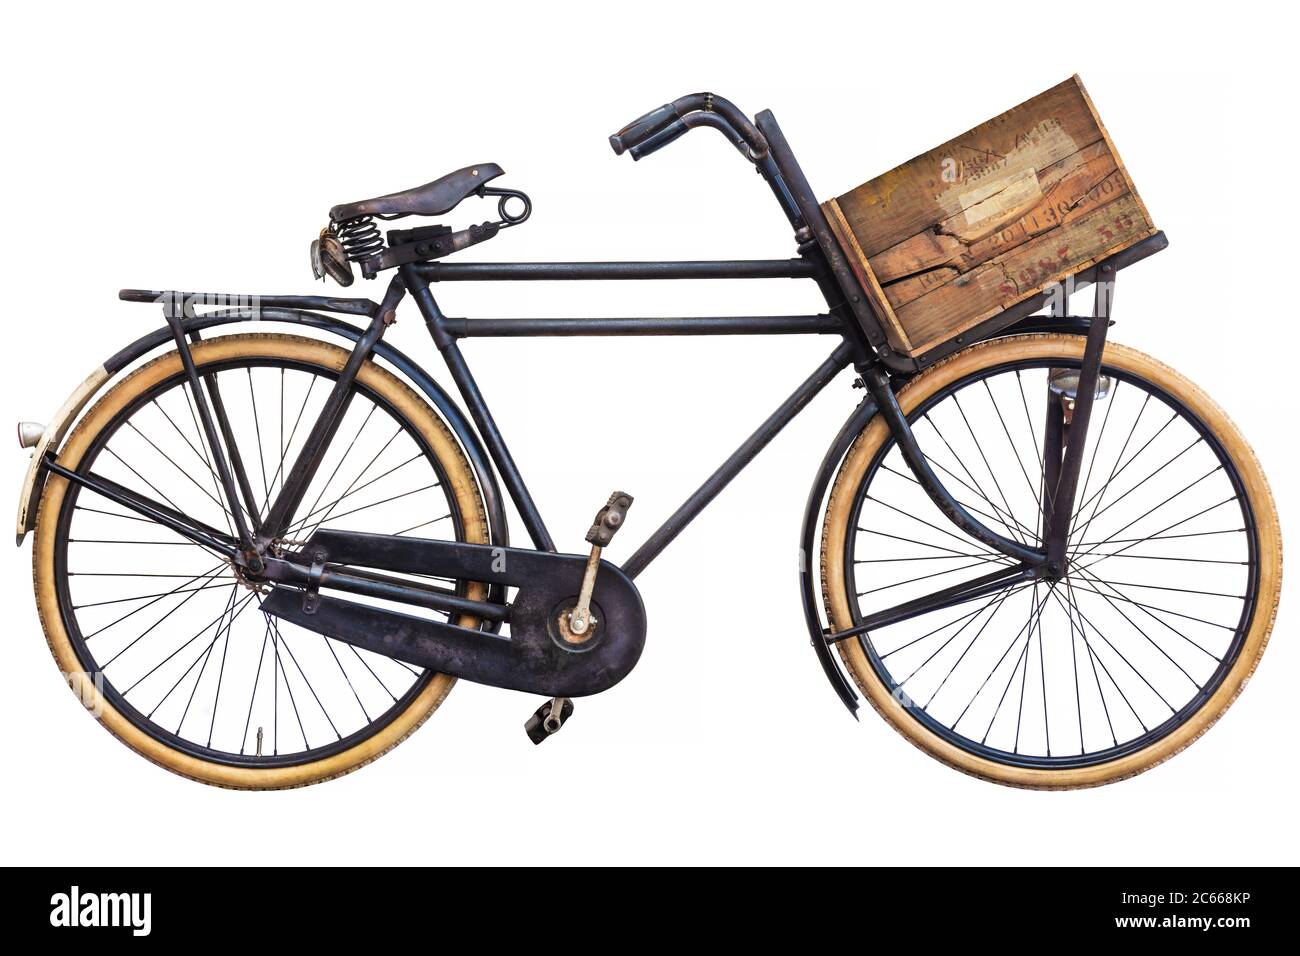 Vintage black cargo bicycle with old wooden transport crate and leather saddle Stock Photo